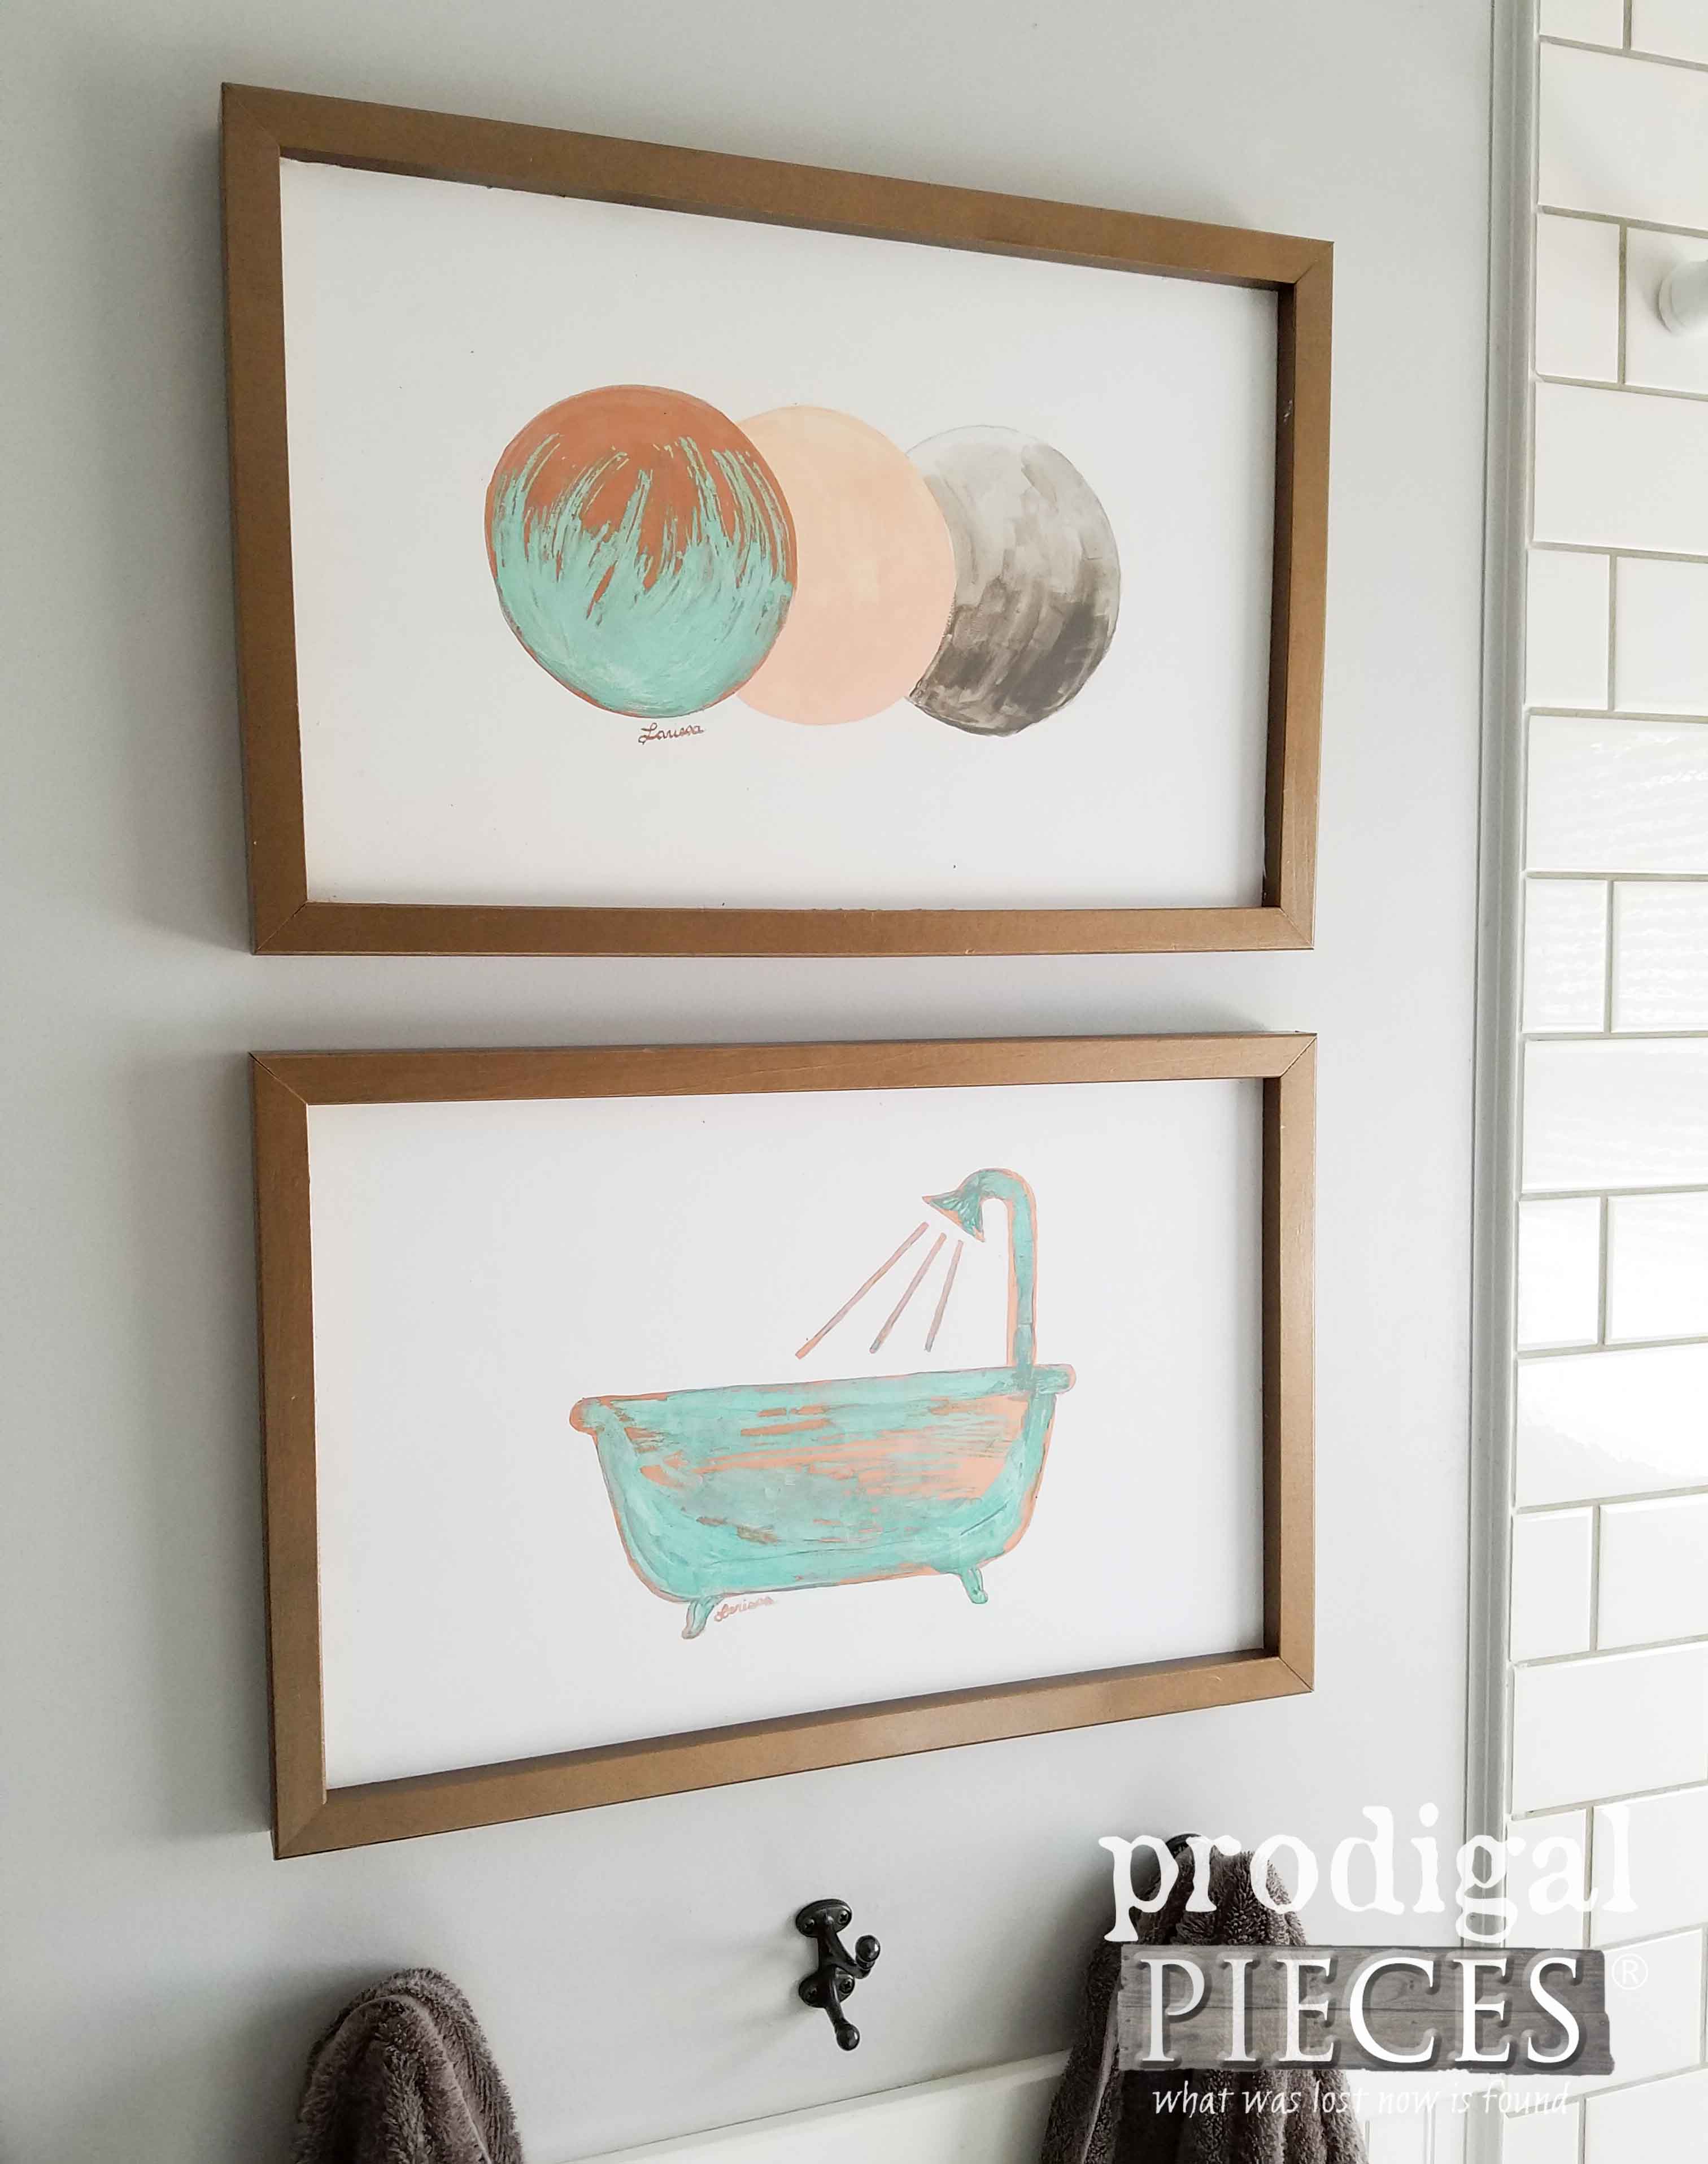 Upcycled Modern Chic Wall Art by Prodigal Pieces | prodigalpieces.com